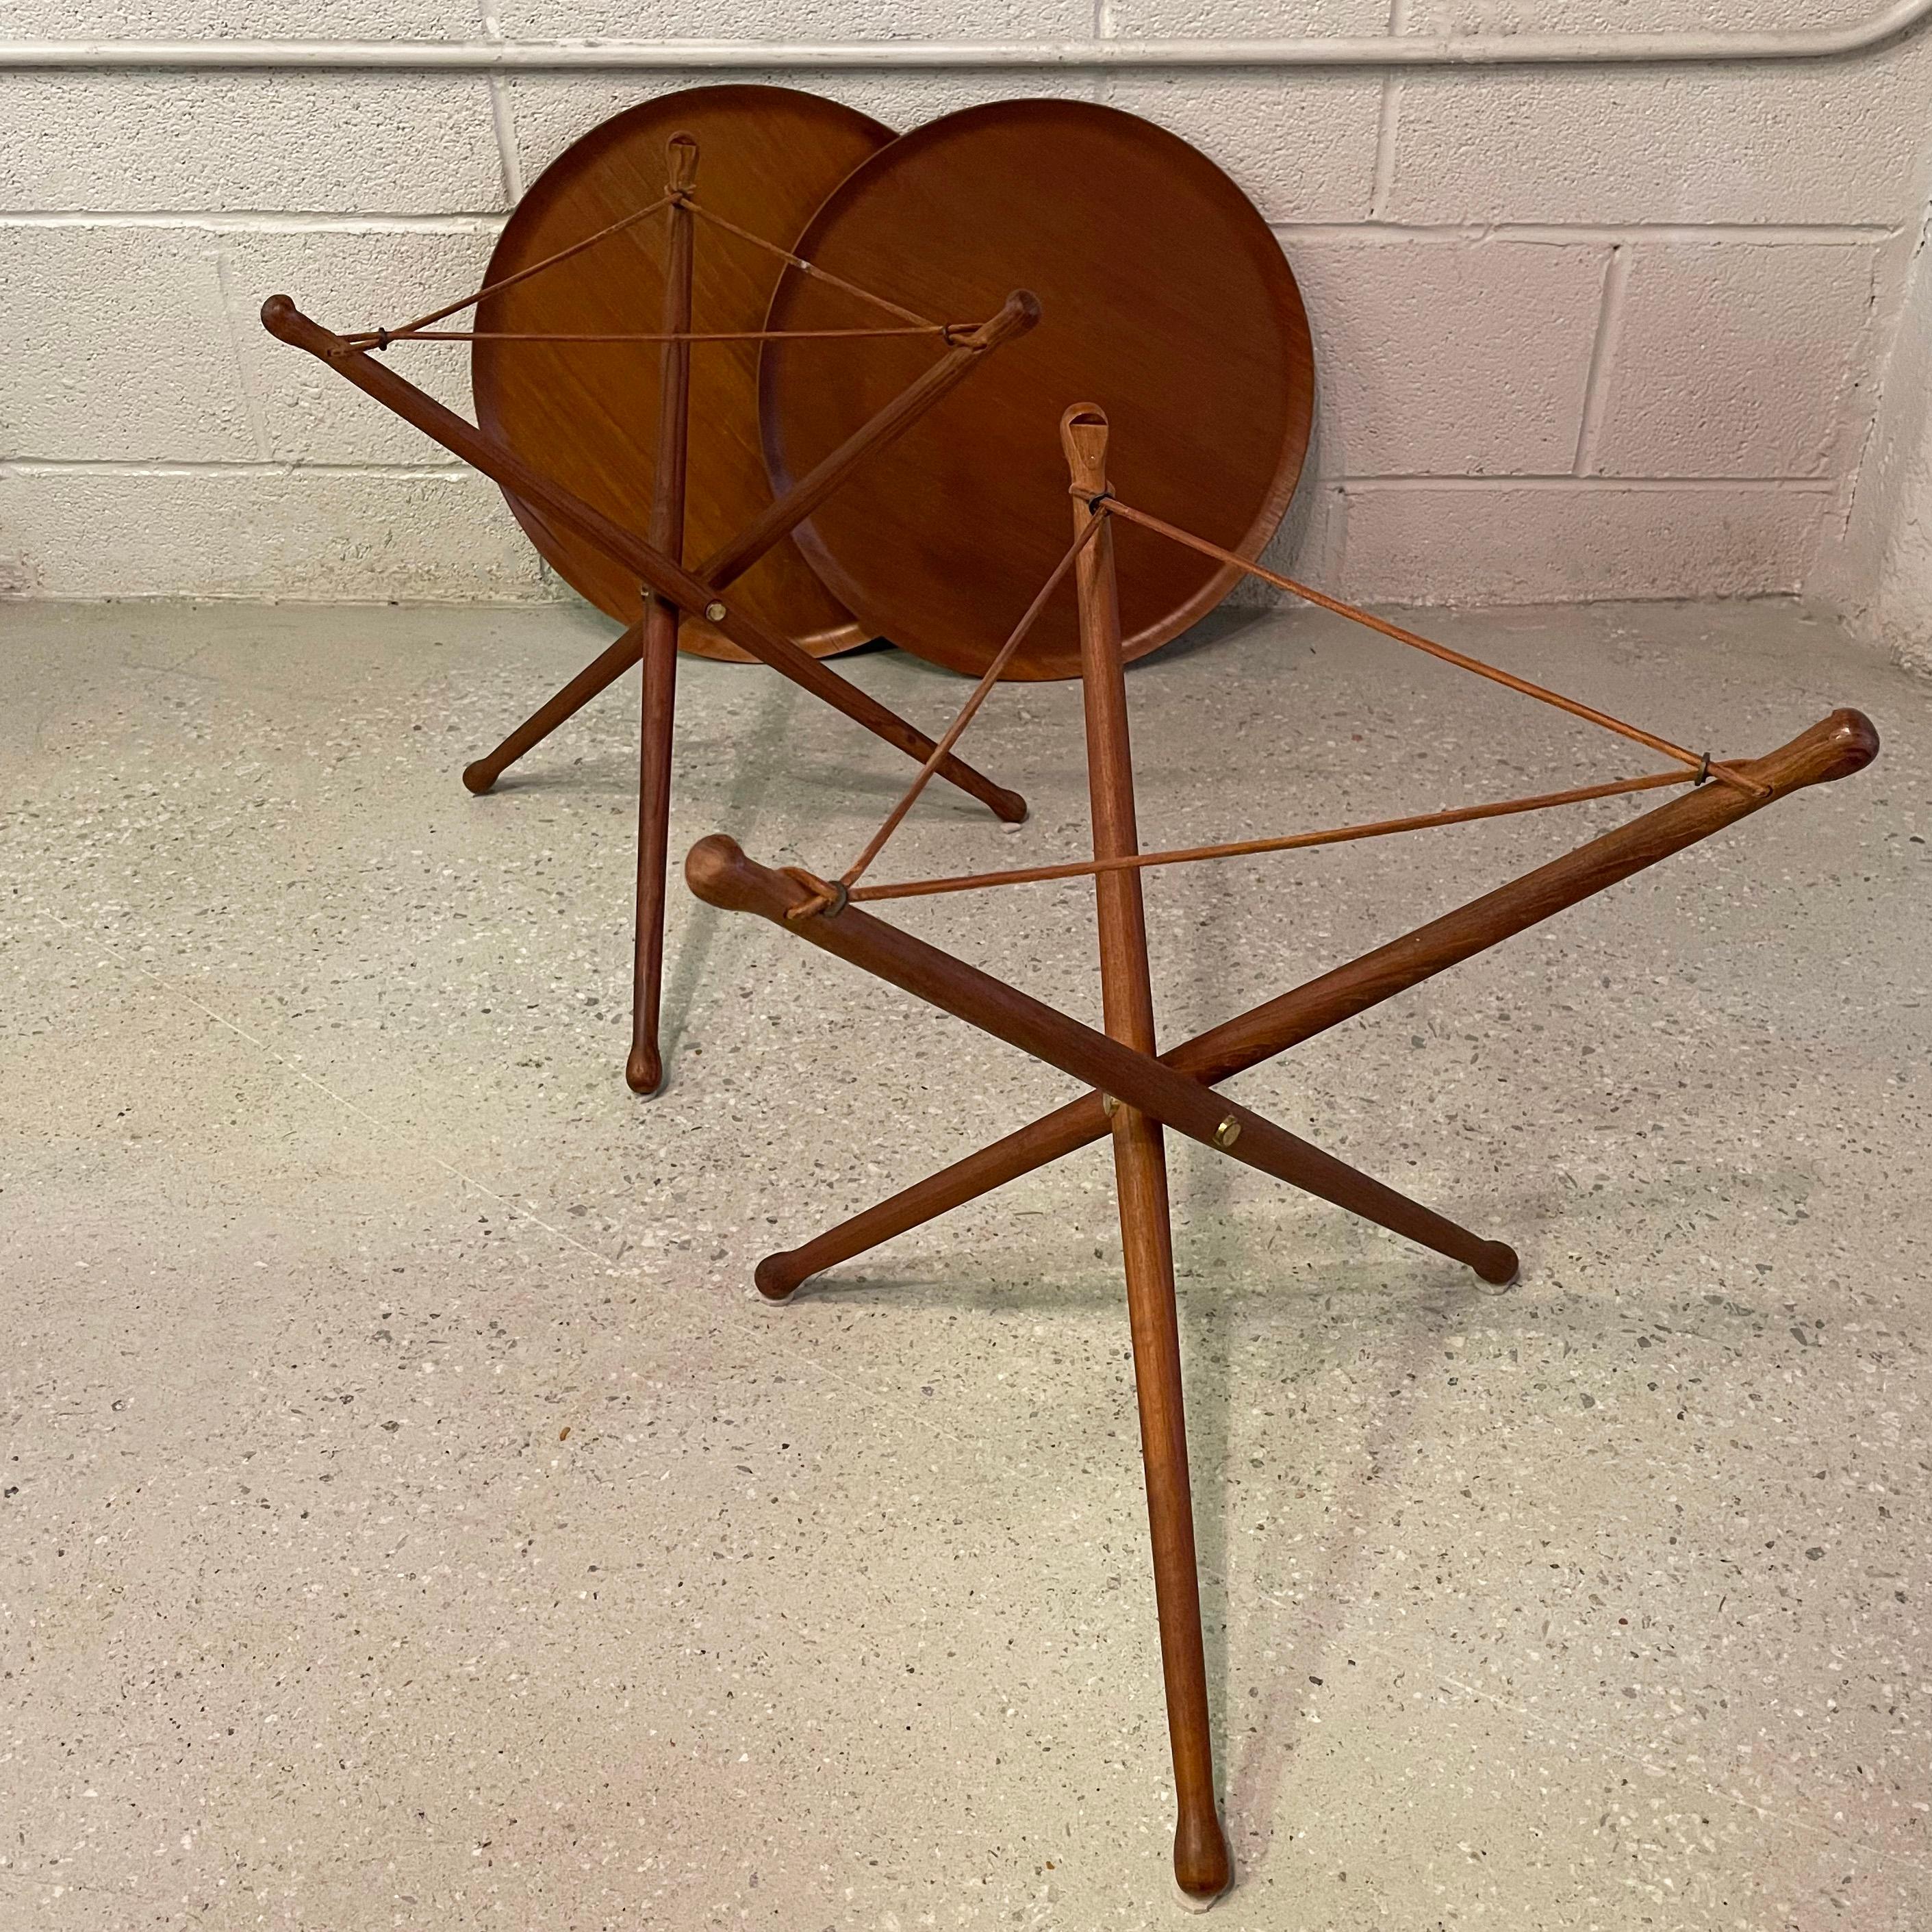 Pair Of Teak Folding Tray Tables By Nils Trautner For Ary Nybro, Sweden In Good Condition For Sale In Brooklyn, NY